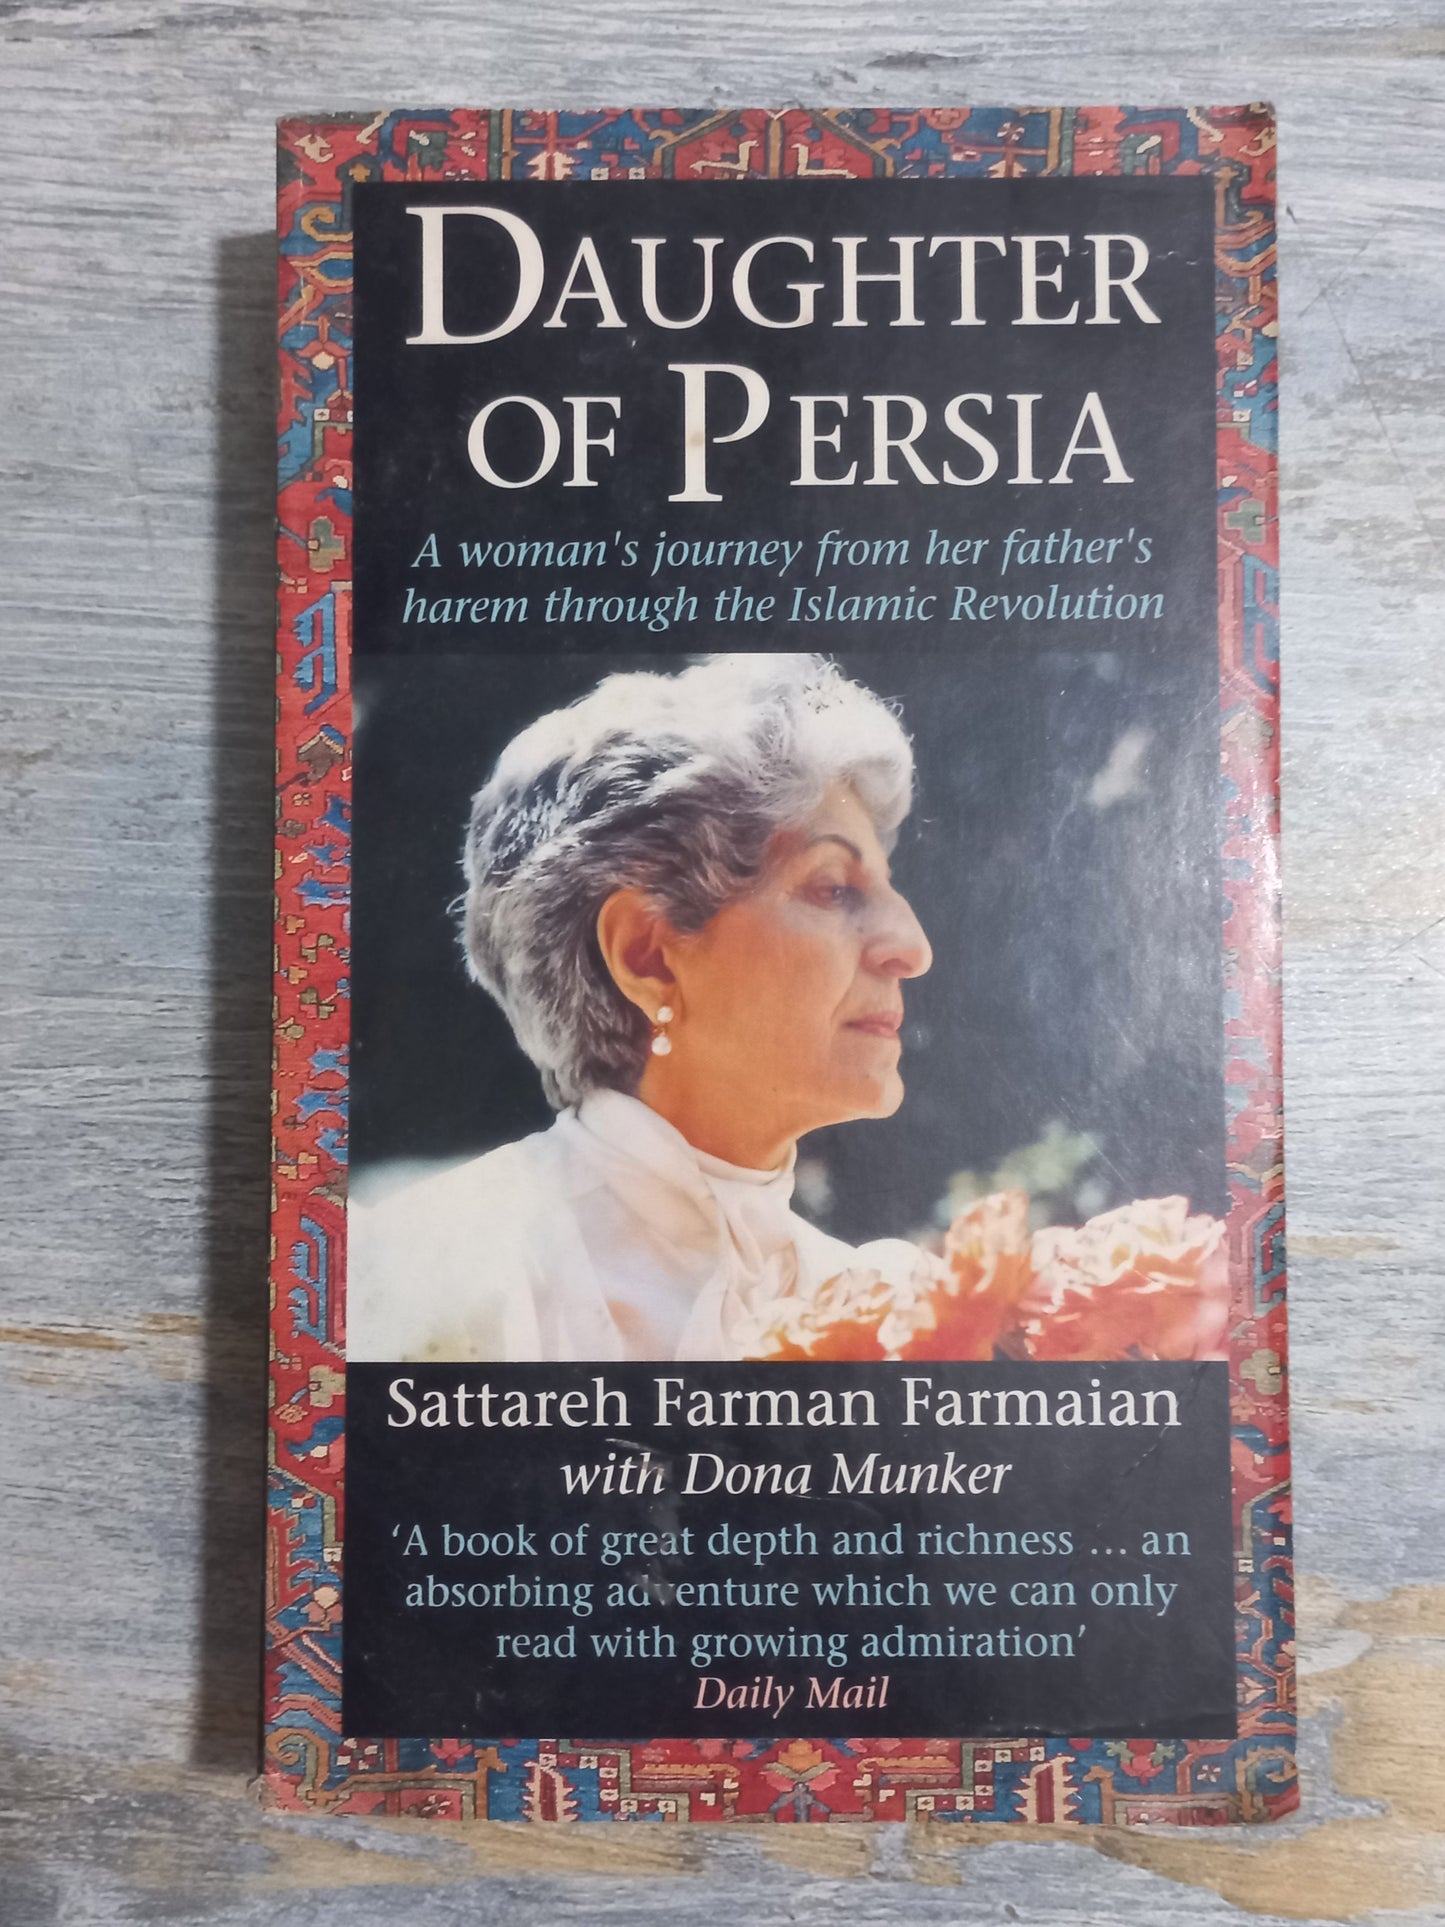 Daughter of Persia: A Woman's Journey from Her Father's Harem Through the Islamic Revolution - Sattareh Farman Farmaian, Dona Munker